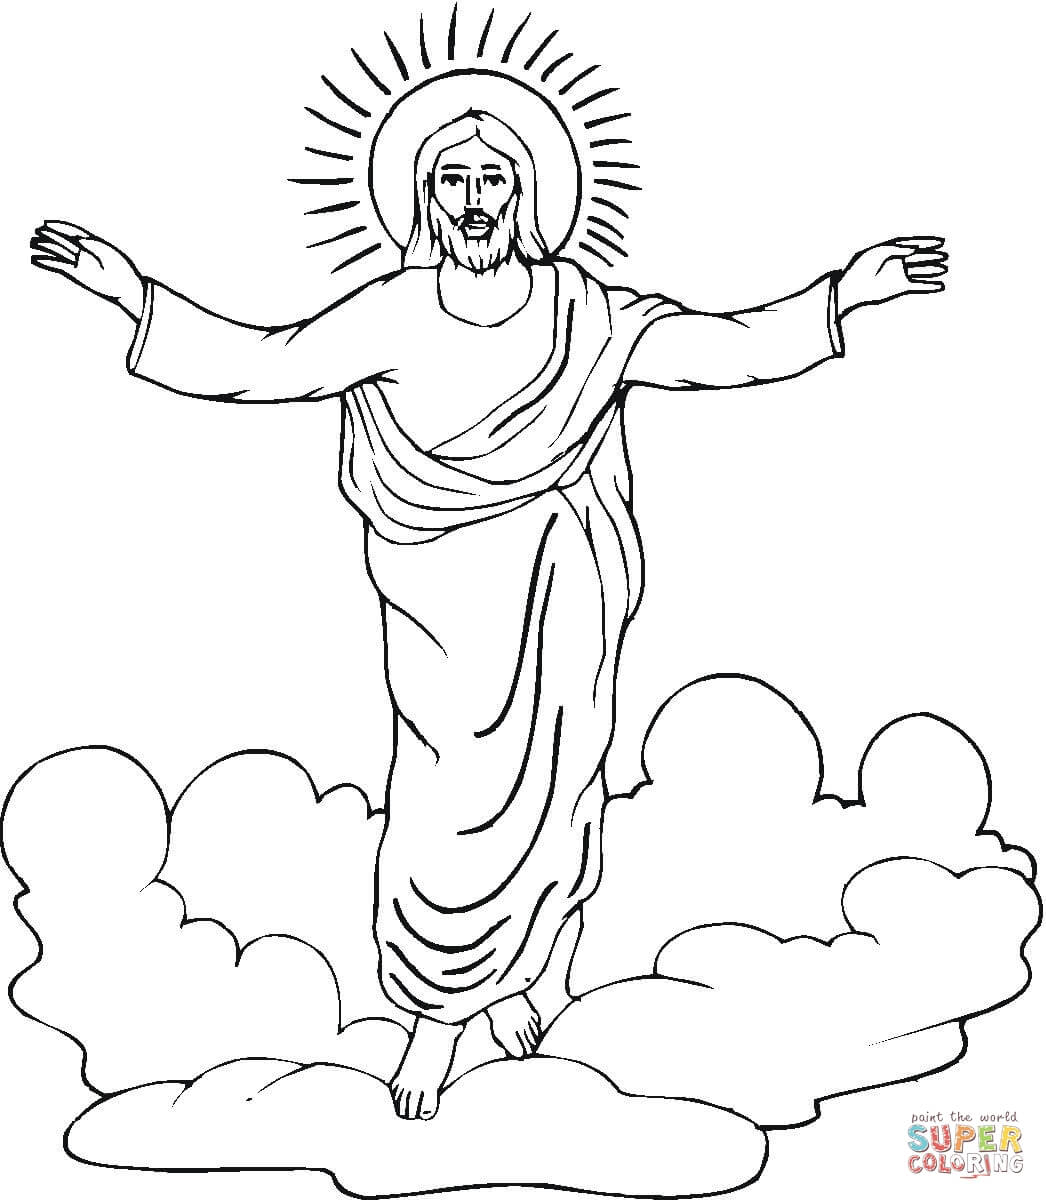 Resurrection Coloring Pages For Preschoolers Resurrection Of Jesus Coloring Page Free Printable Coloring Pages